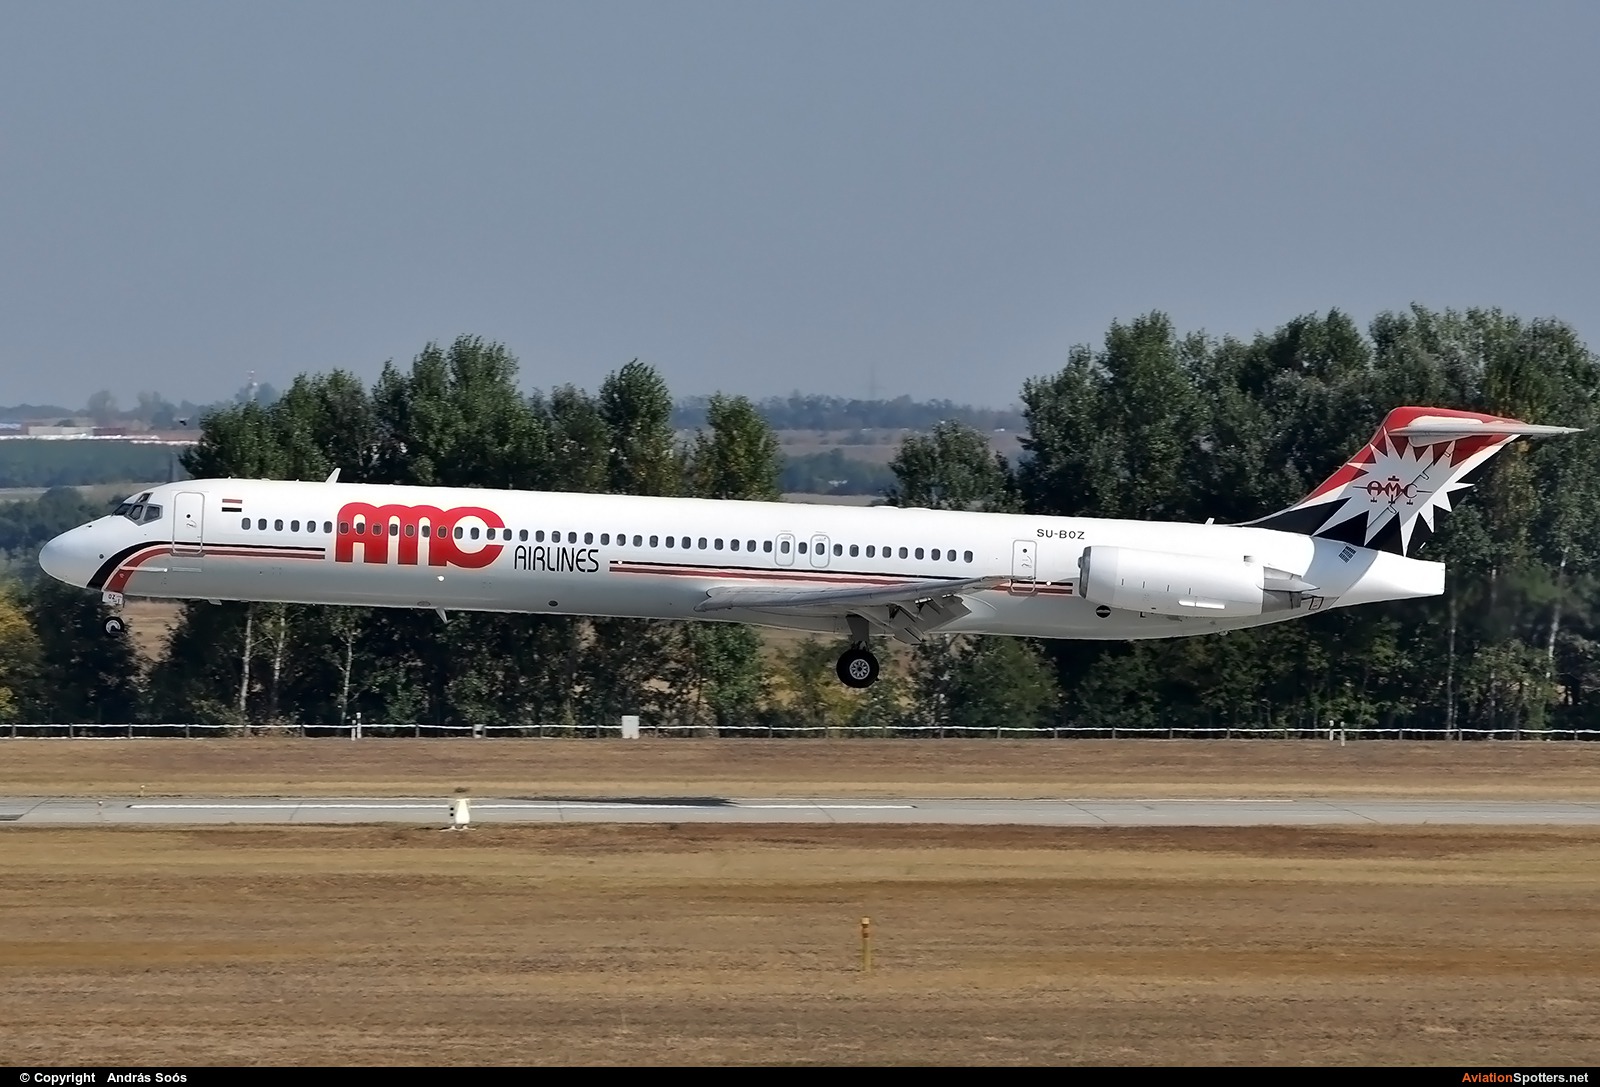 AMC Airlines  -  MD-83  (SU-BOZ) By András Soós (sas1965)